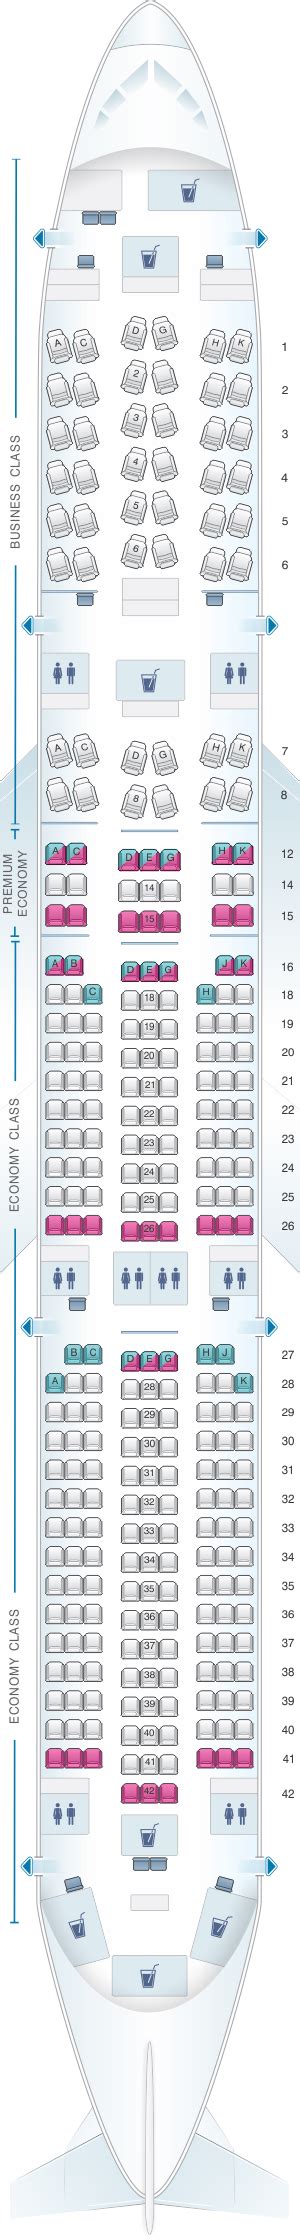 seat map air france image